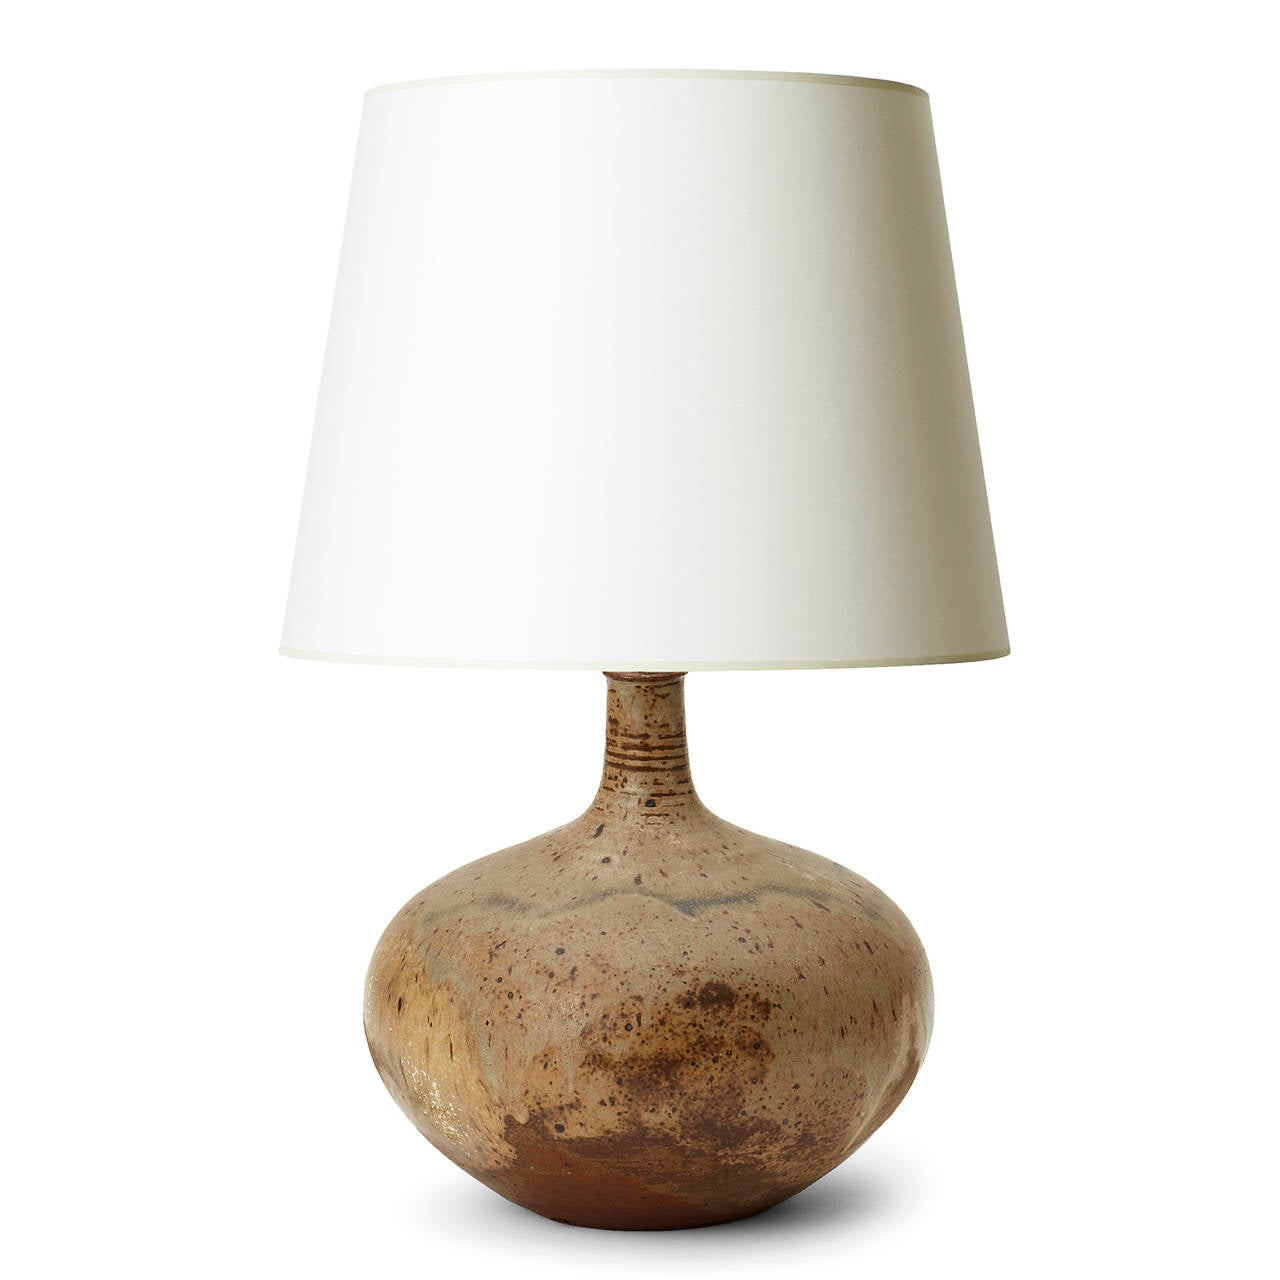 Table lamp with bulb shaped base and attenuated neck by Vallauris potter Jacky Coulle, hand-turned by the artist in stoneware with evocative semi-matte earthy glazes. Inscribed signature. Coulle and numerous other ceramists flocked to this are in